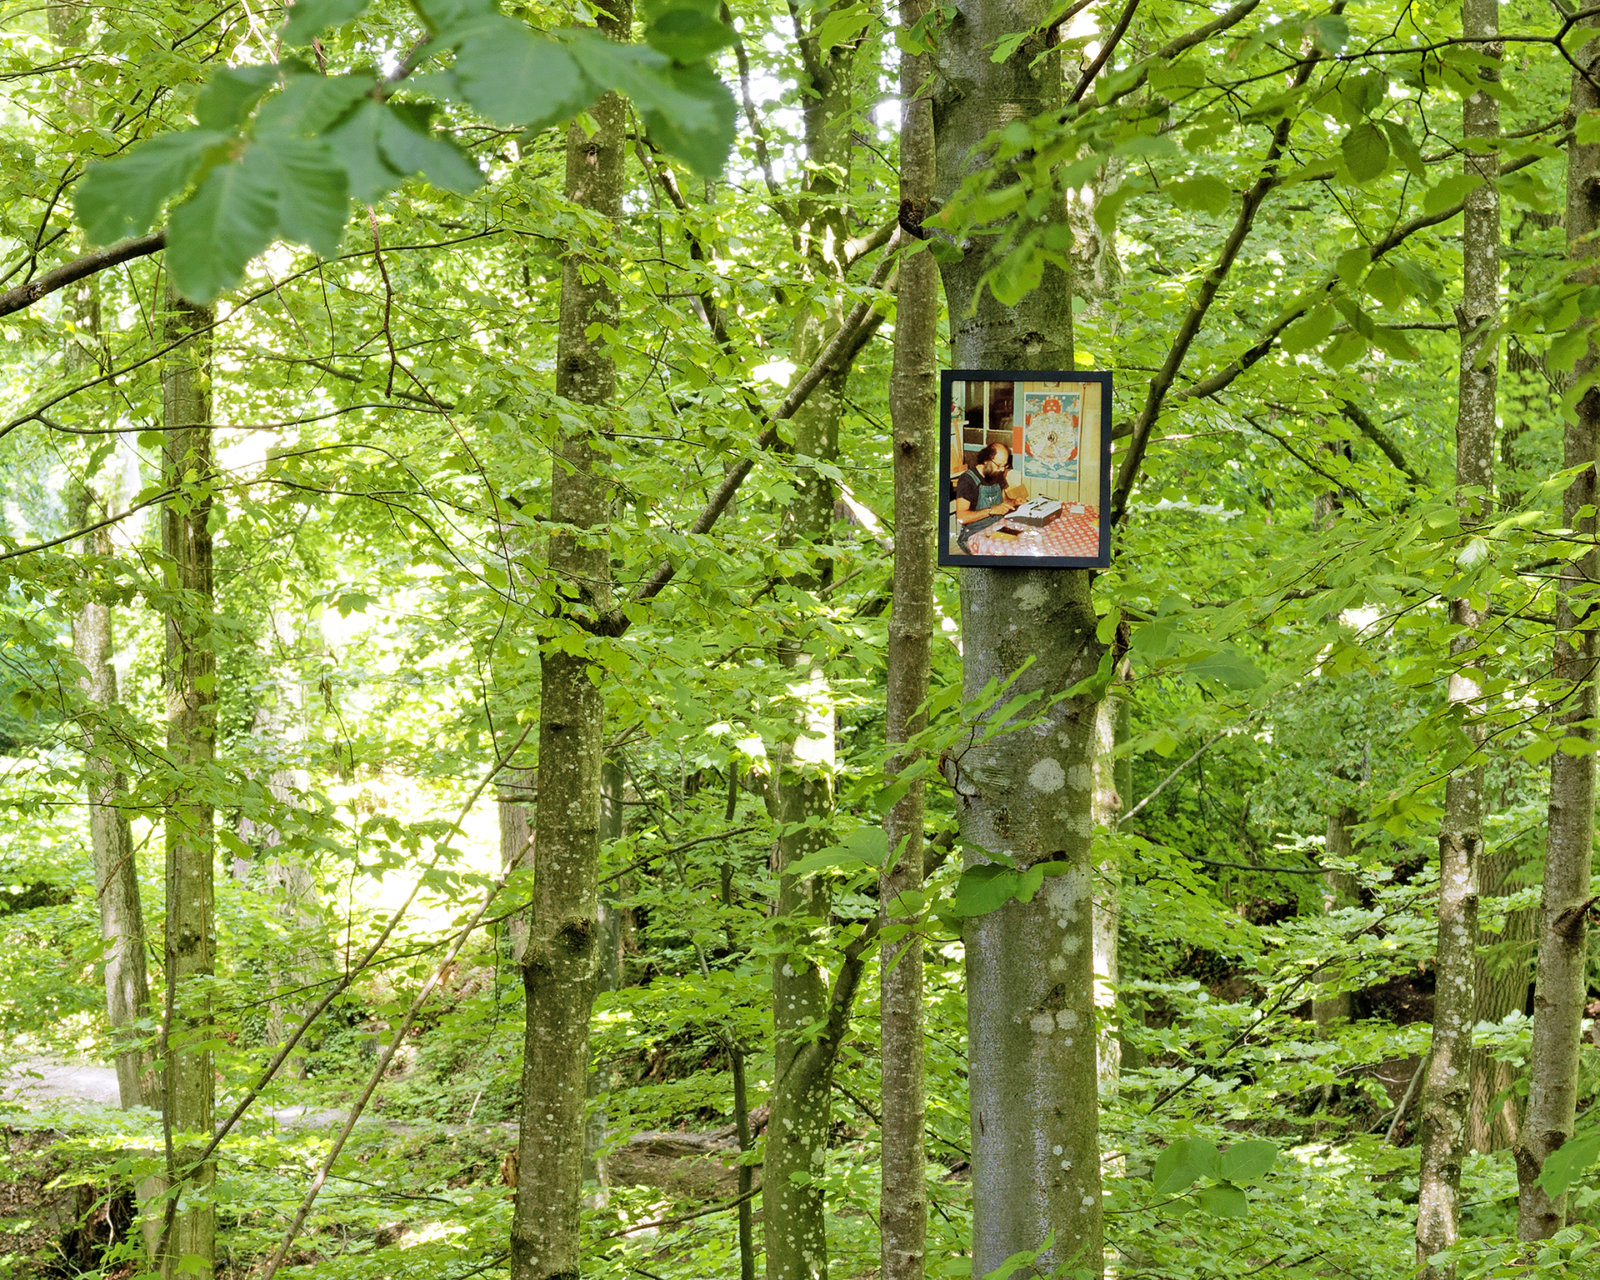 Geoffrey Farmer, If You Want To See Something Look at Something Else (Allen Ginsberg 1926–1997) from The Invisible Worm that Flies in the Night, 2011, 50 colour photographs mounted on perspex, framed, dimensions variable. Installation view, The Garden of Forking Paths, Migros Museum für Gegenwartskunst, Zurich, 2011